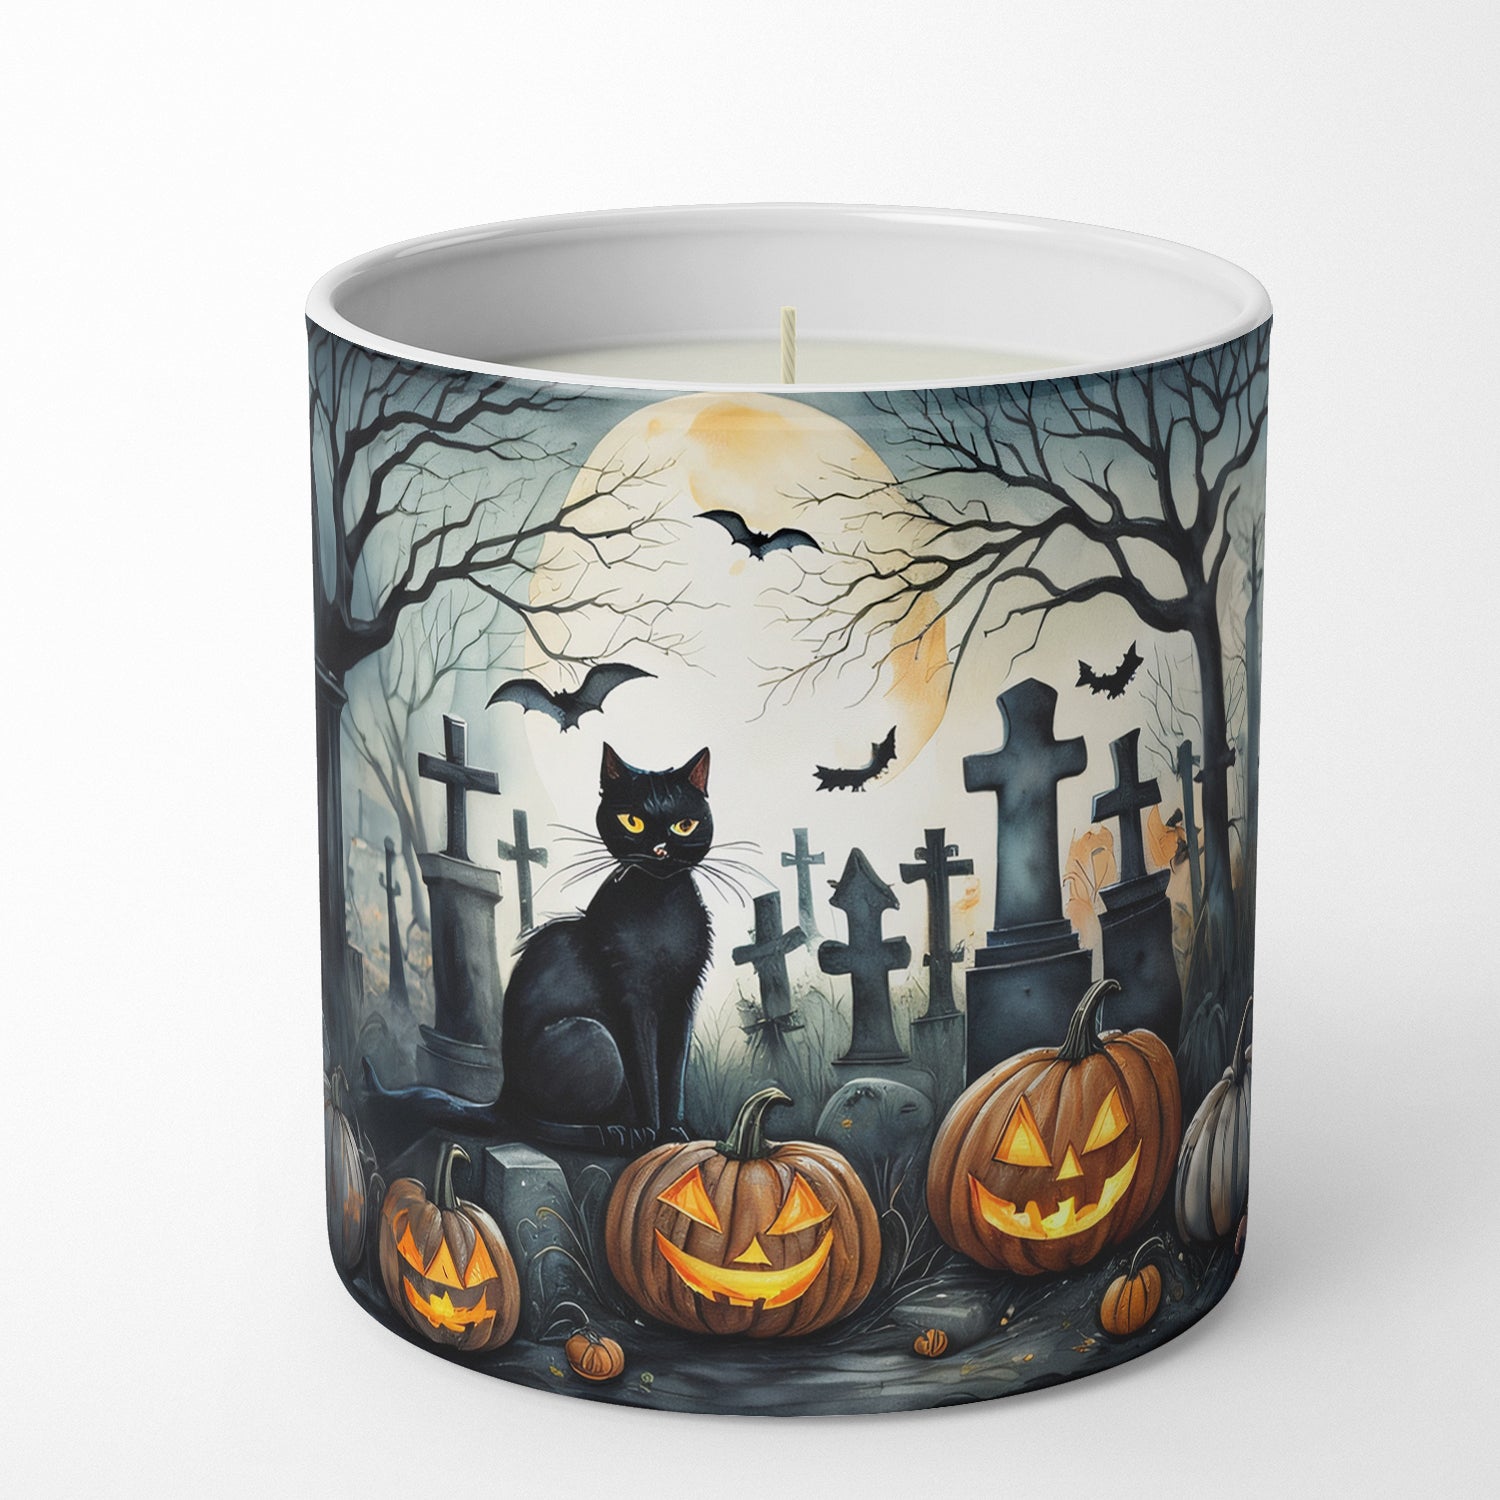 Buy this Black Cat Spooky Halloween Decorative Soy Candle